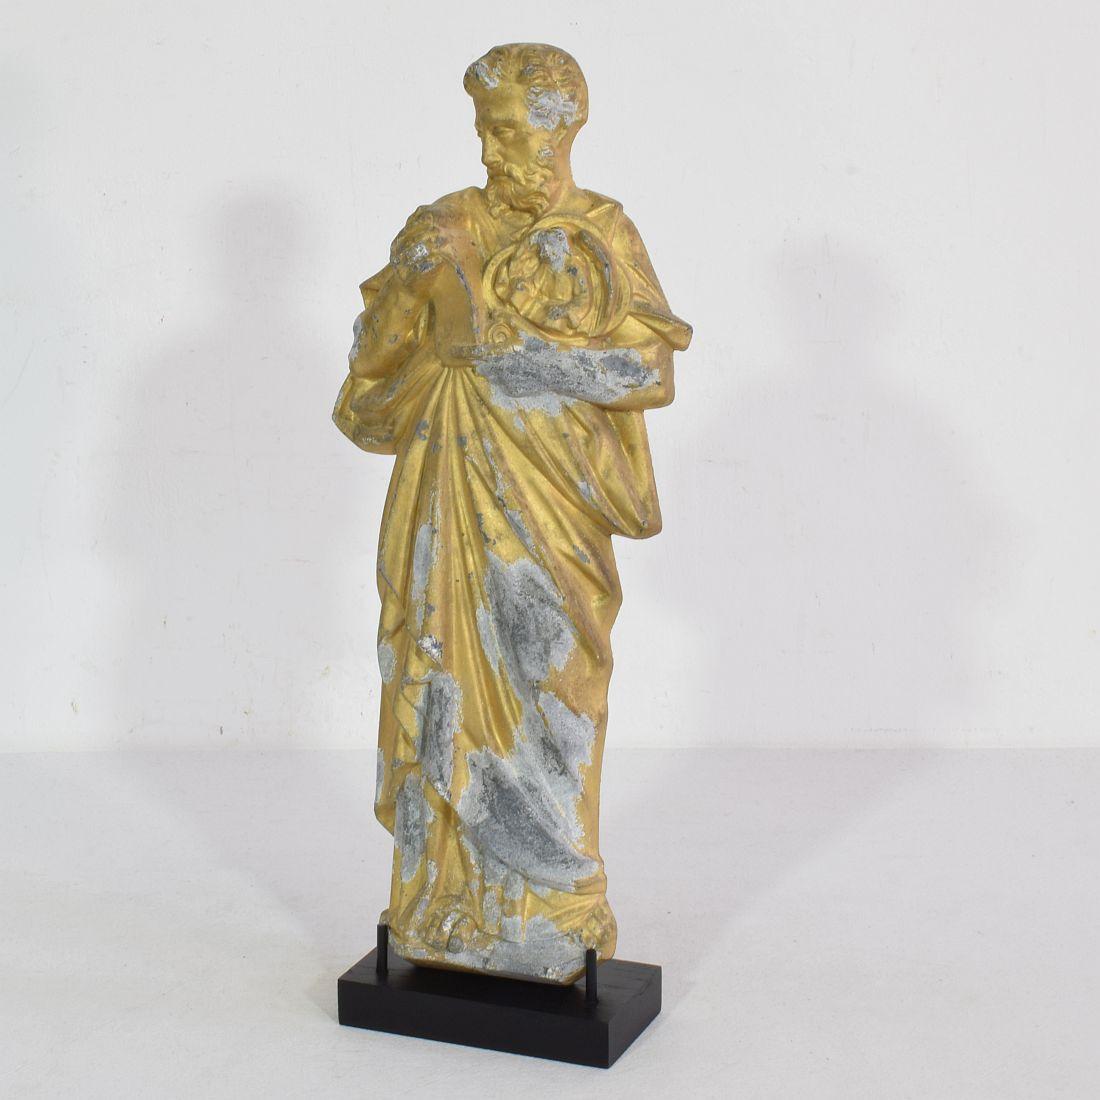 Wonderful gilded metal saint statue with beautiful expression,
France, circa 1880-1900.
Weathered. Measurements include the wooden base.